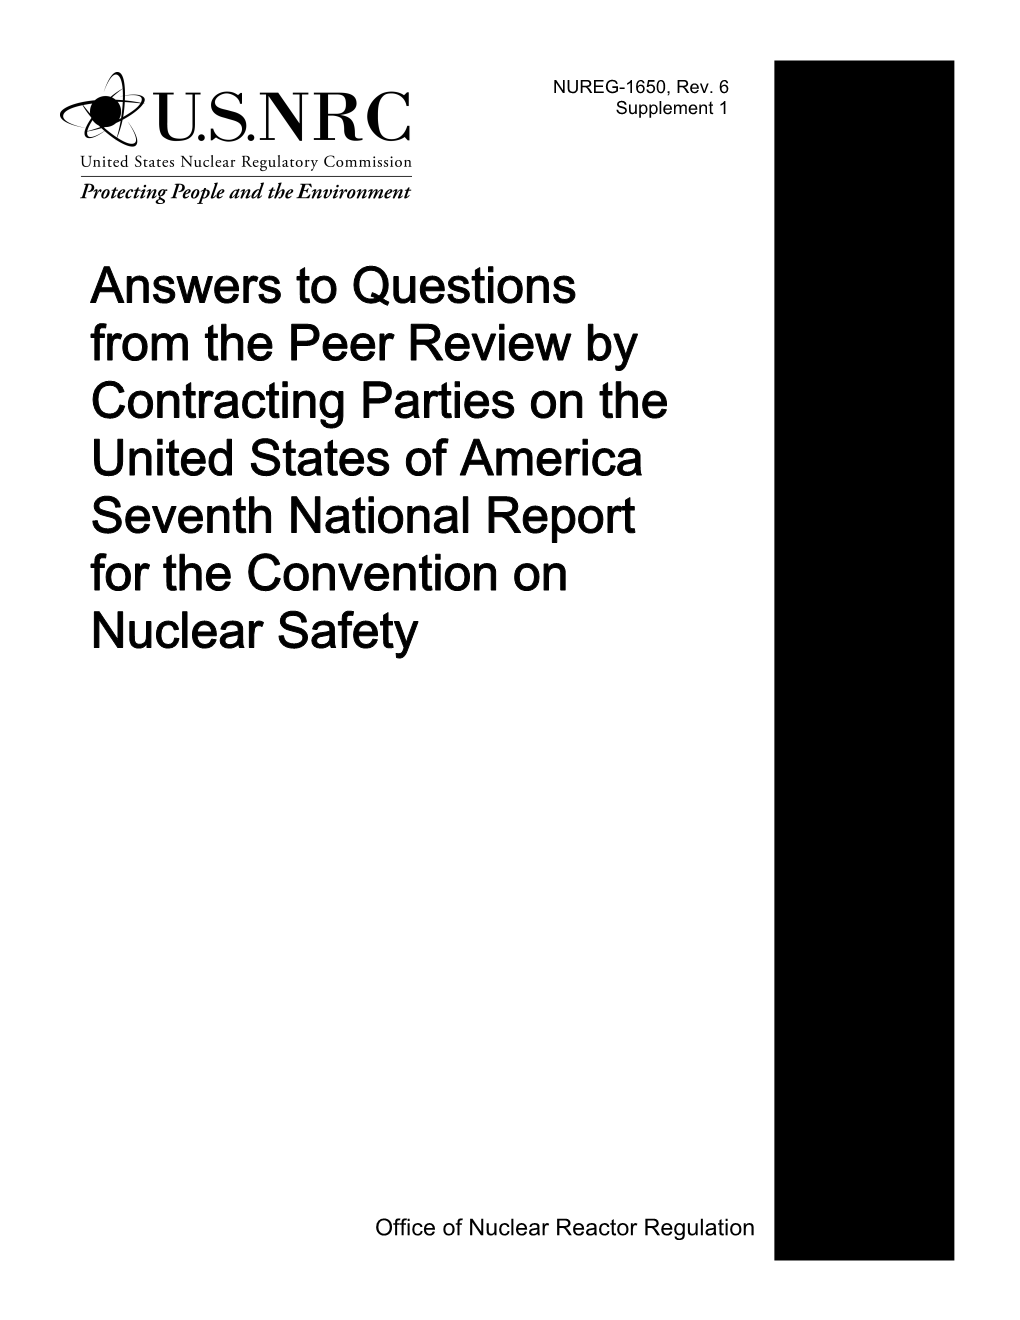 Answers to Questions from the Peer Review by Contracting Parties on the United States of America Seventh National Report for the Convention on Nuclear Safety